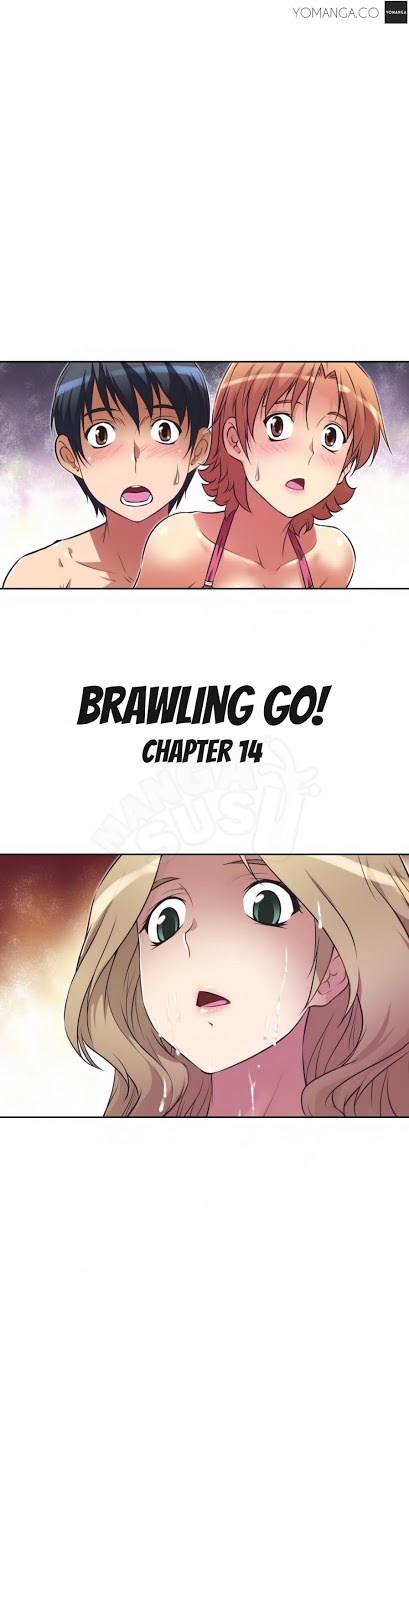 Brawling Go Chapter 14